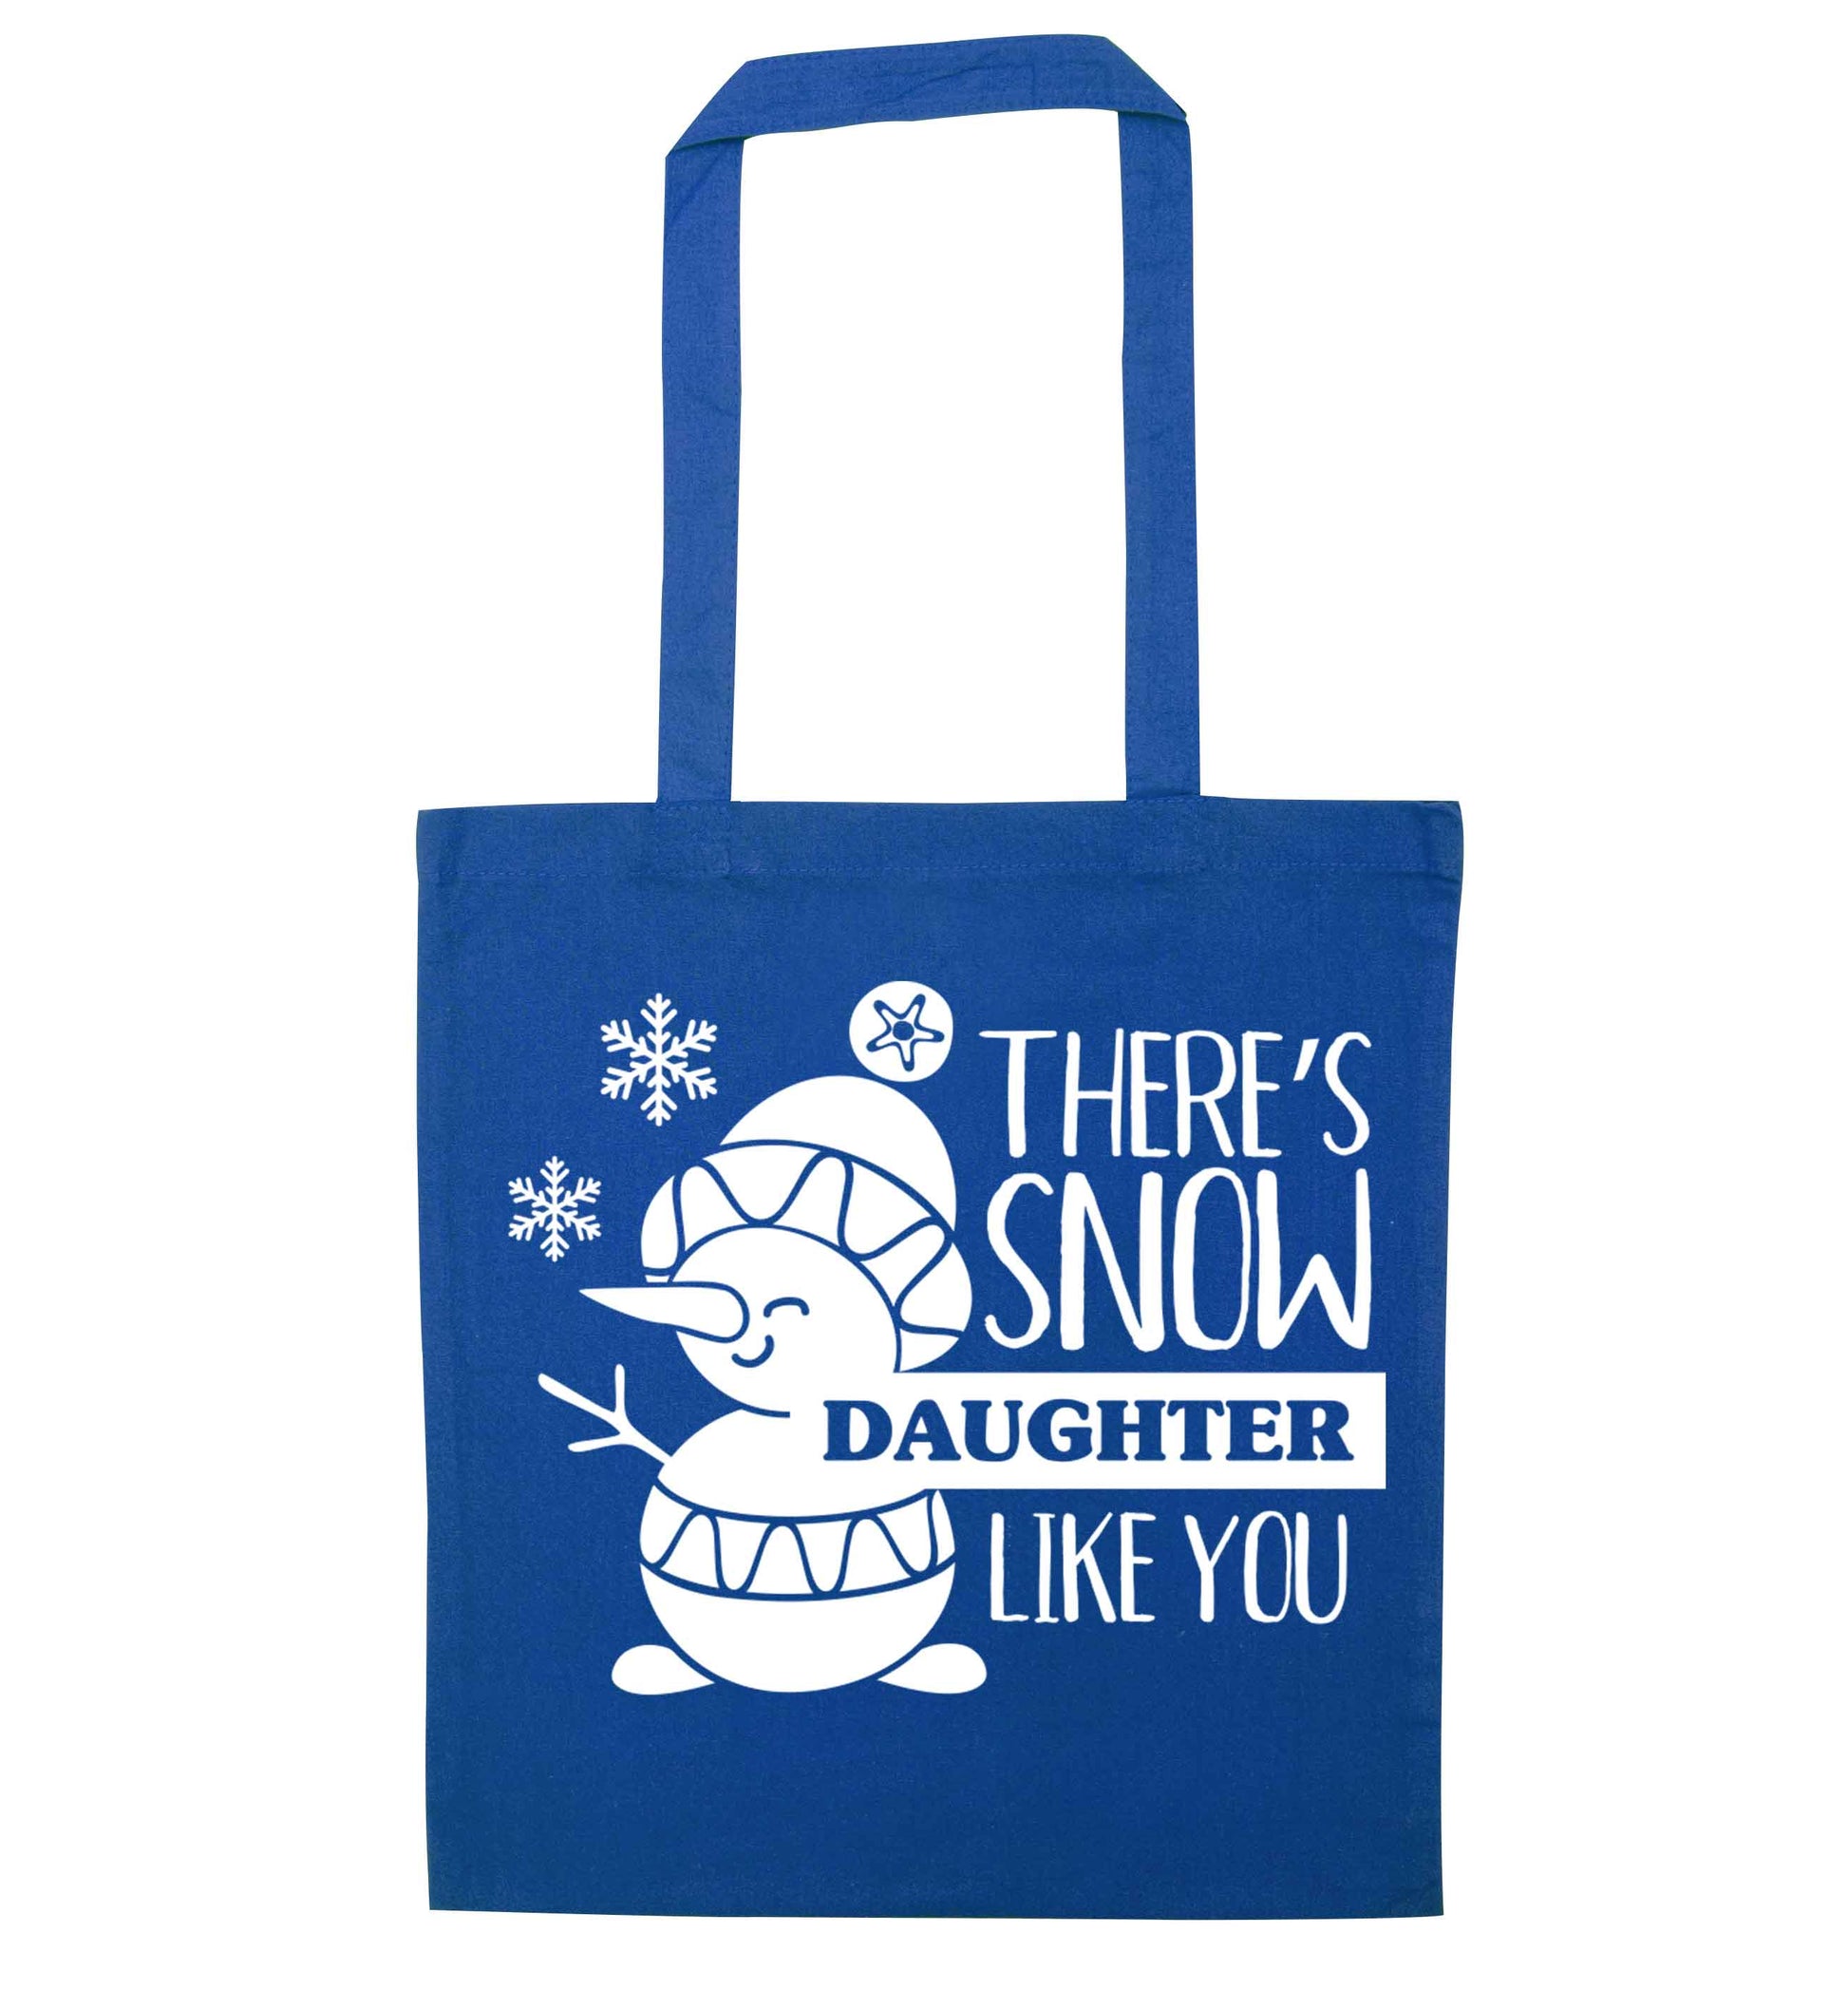 There's snow daughter like you blue tote bag